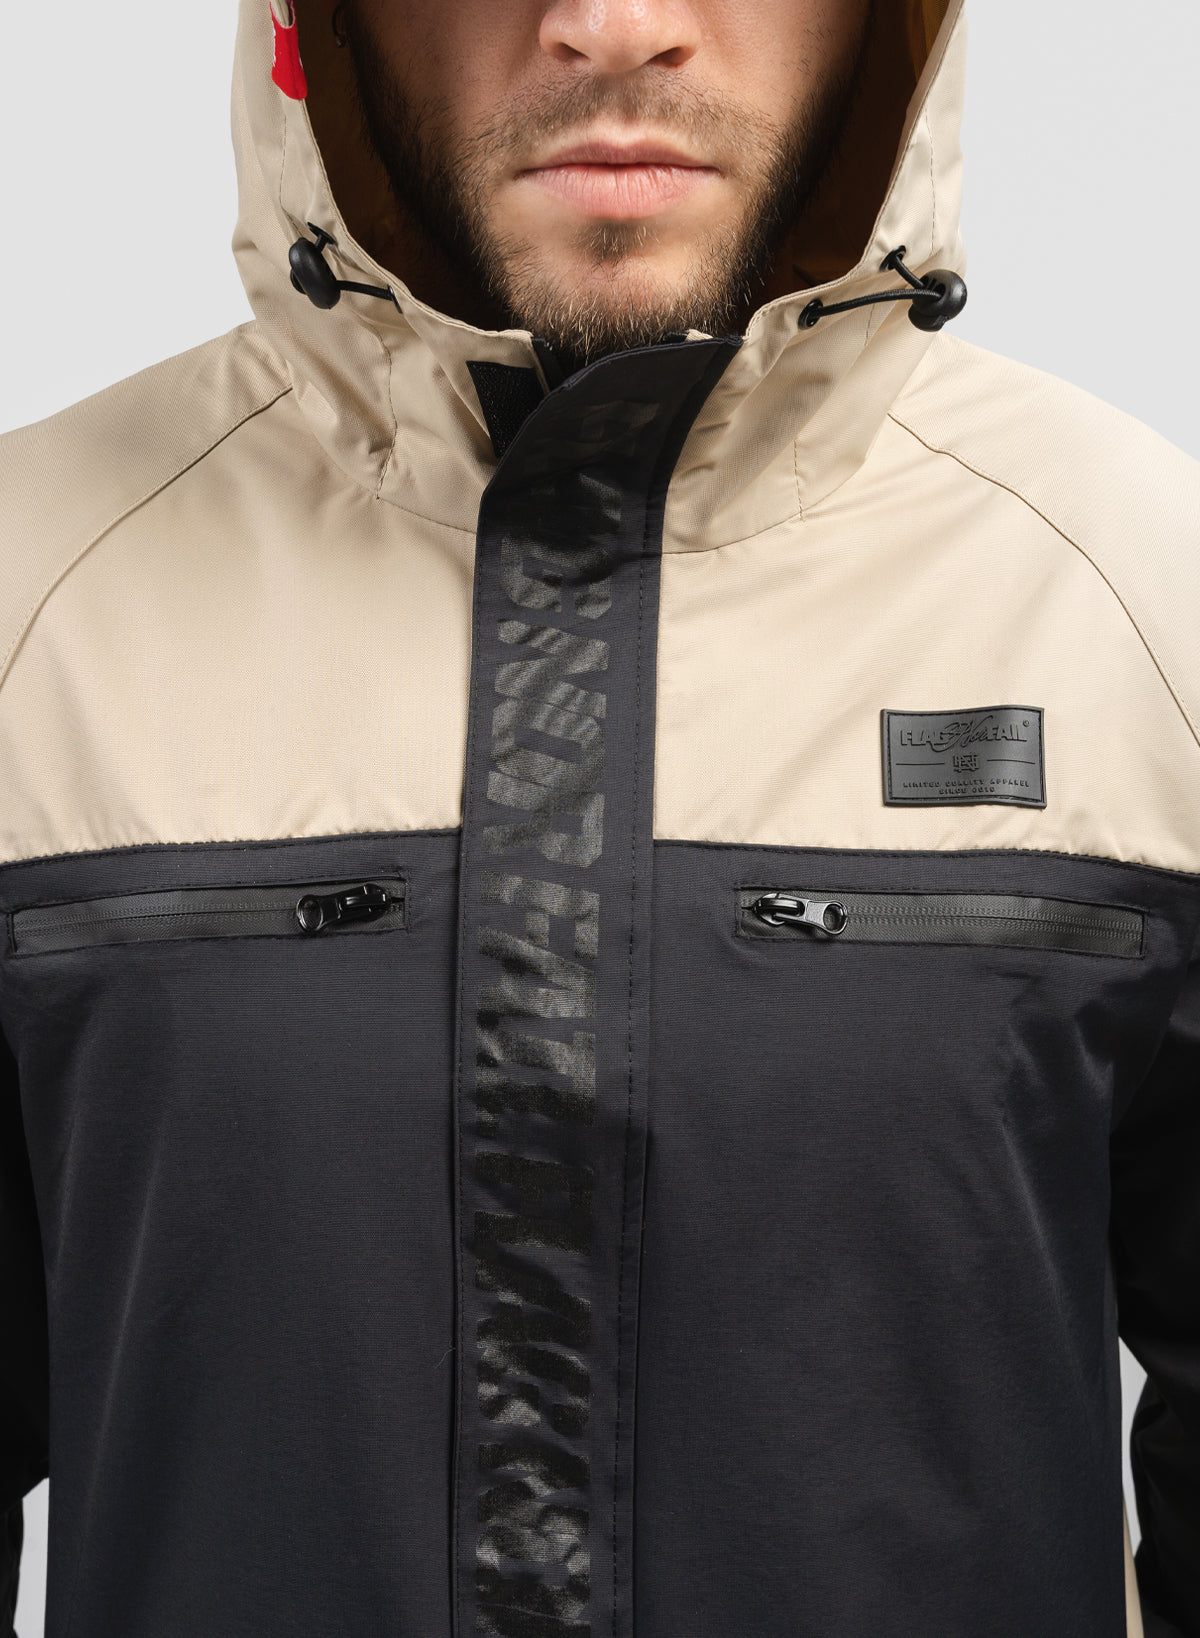 THE NORTH FACE / MOUNTAIN JACKET 1985 / $150 AUD.